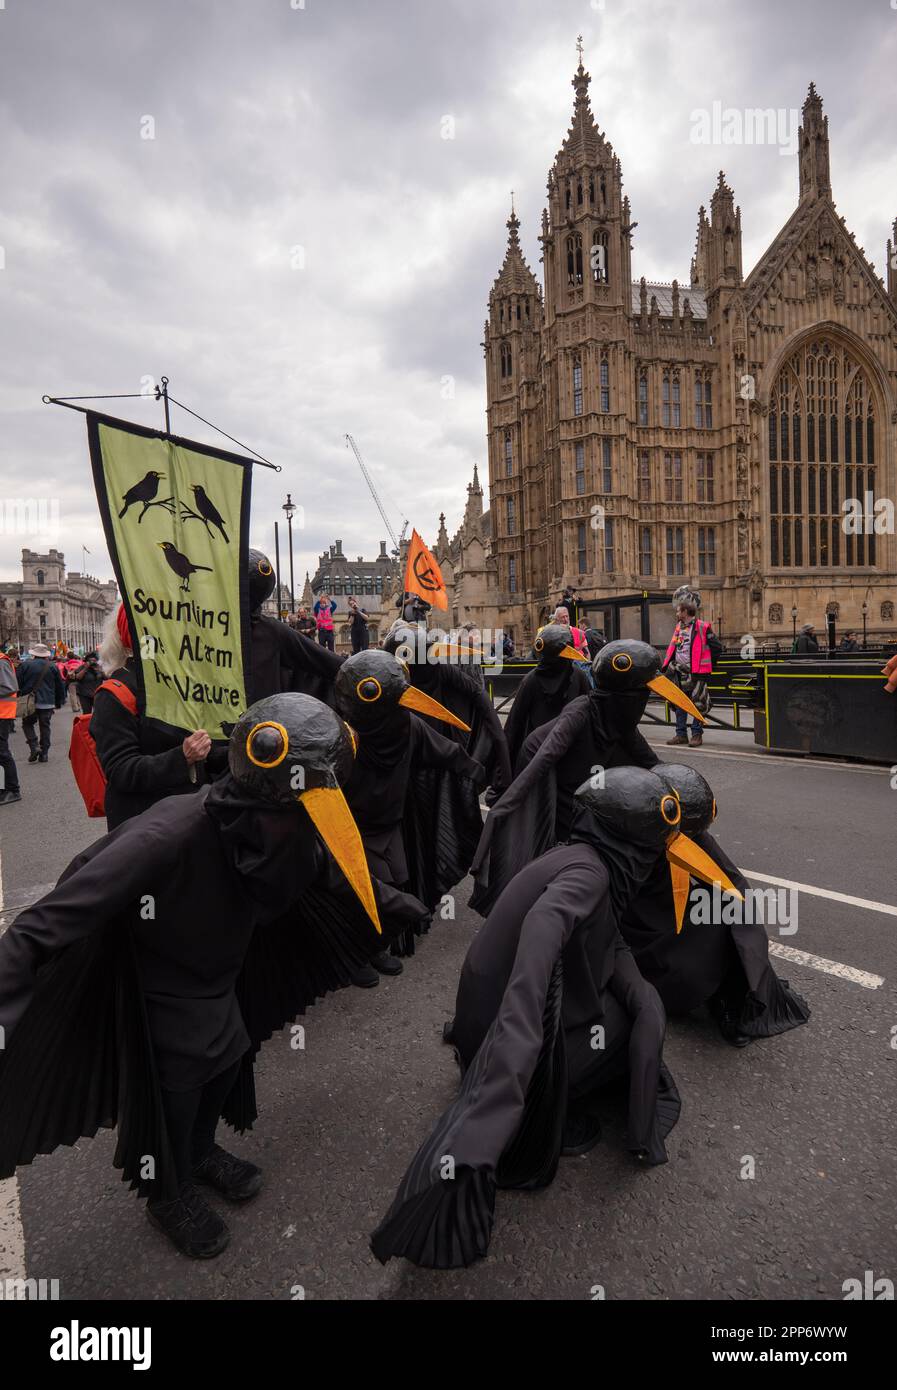 London, UK . 22nd Apr, 2023. Black Birds at Extinction Rebellion, The Big one, day 2 ,( saturday). Involved the 'Big One march for biodiversity'which ended with a 'die in'. Members of the 'Red Rebel Brigade 'and 'Green spirits' attended, 22 April 2023 London United KIngdom Picture garyroberts/worldwidefeatures.com Credit: GaryRobertsphotography/Alamy Live News Credit: GaryRobertsphotography/Alamy Live News Stock Photo